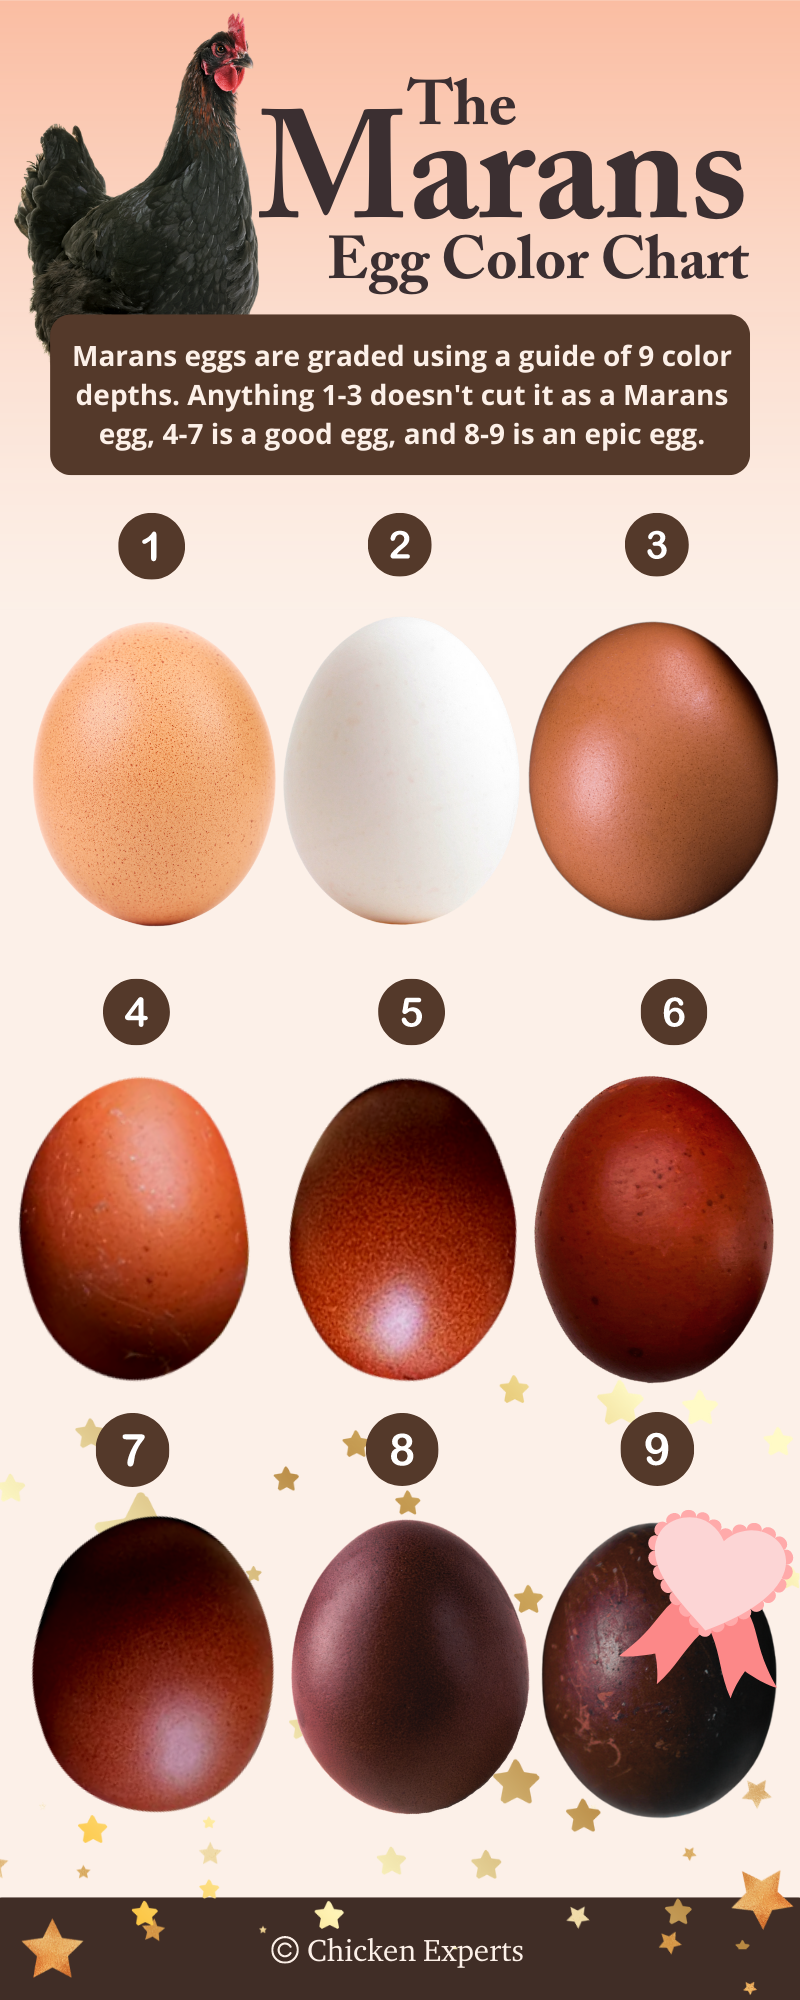 marans chicken breed egg color chart